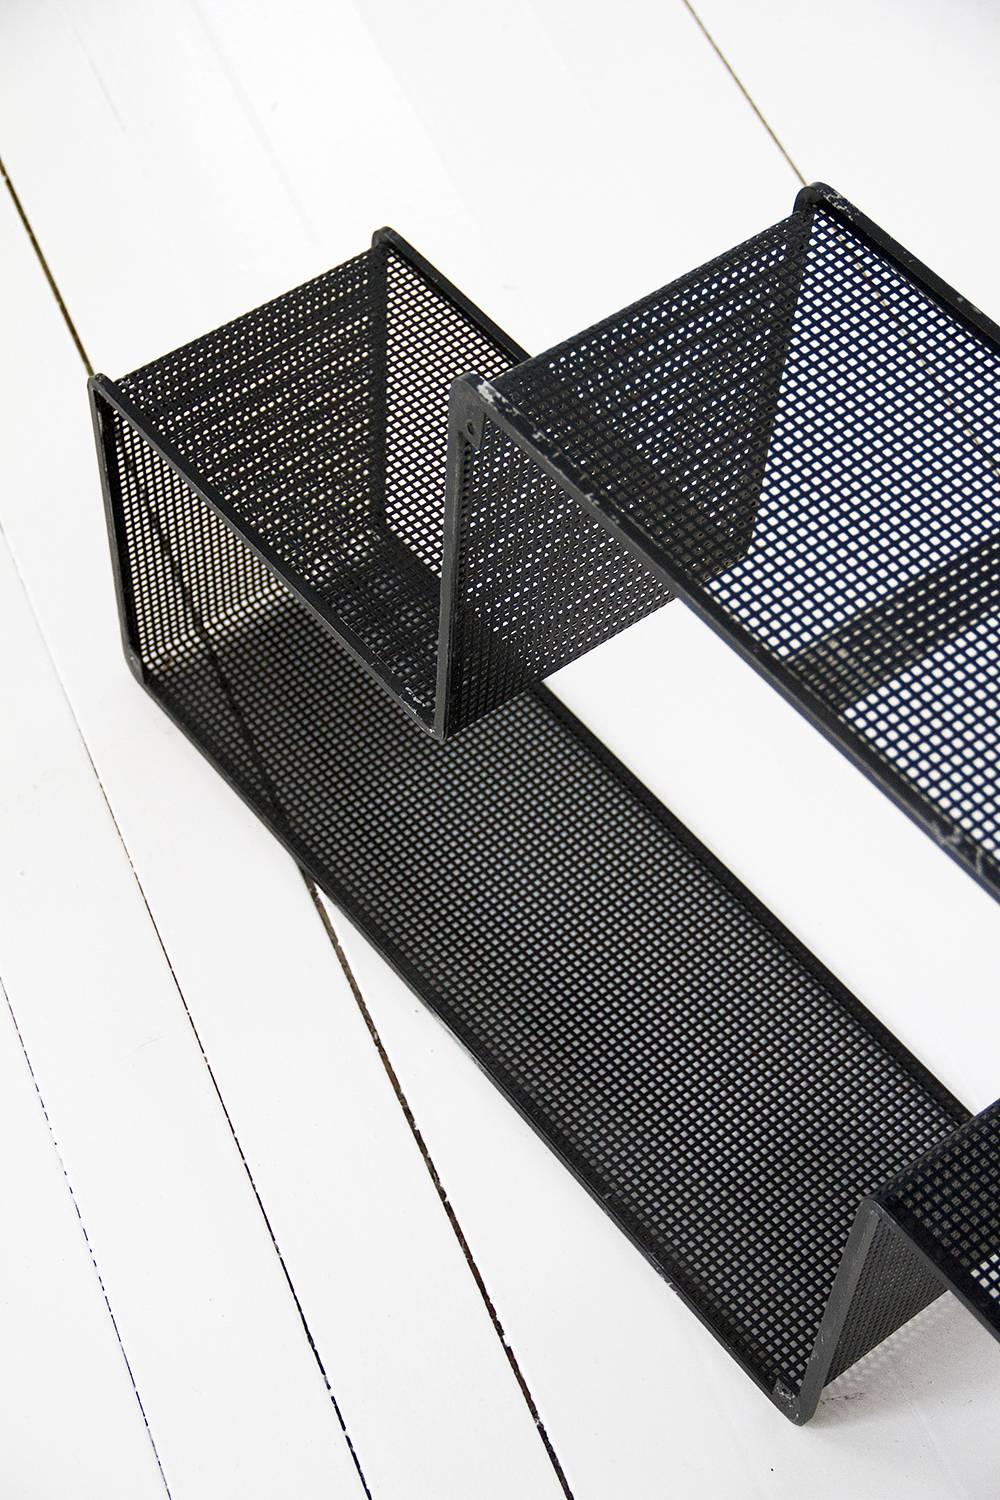 Black Dedal Wall Shelf by Mathieu Mategot, Perforated Steel, circa 1950, France For Sale 4